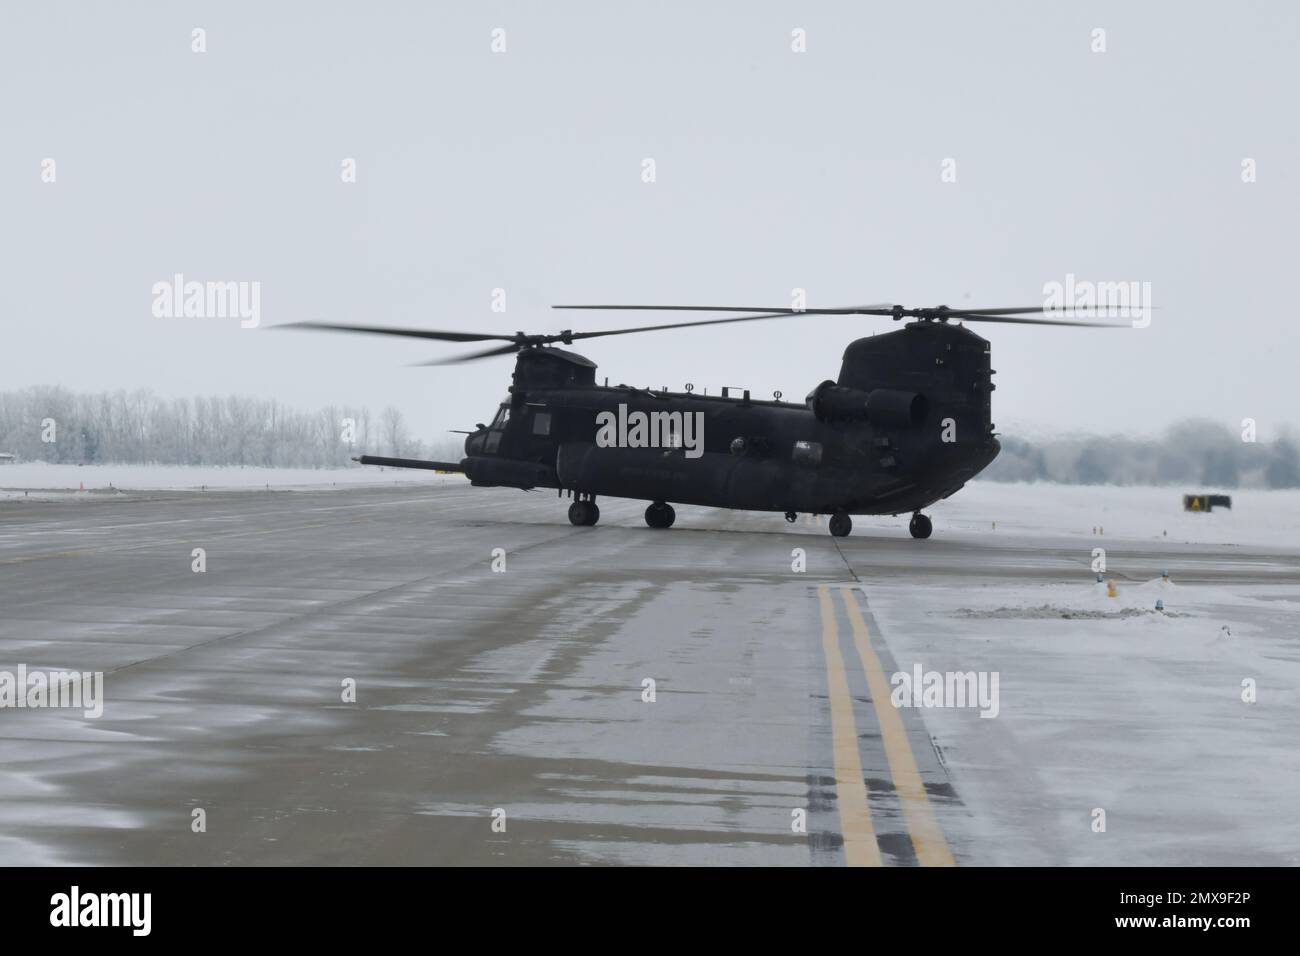 A U.S. Army MH-47G Chinook helicopter taxis on the flight line at Grand Forks Air Force Base, North Dakota, Jan 20. 2023. About 70 members from the 4th Battalion, 160th Special Operations Aviation Regiment assigned to Joint Base Lewis-McChord, Washington, traveled to Grand Forks AFB with several Chinooks to conduct cross-arms training and operations in arctic conditions. (U.S. Air Force Photo by Airman Colin Perkins) Stock Photo